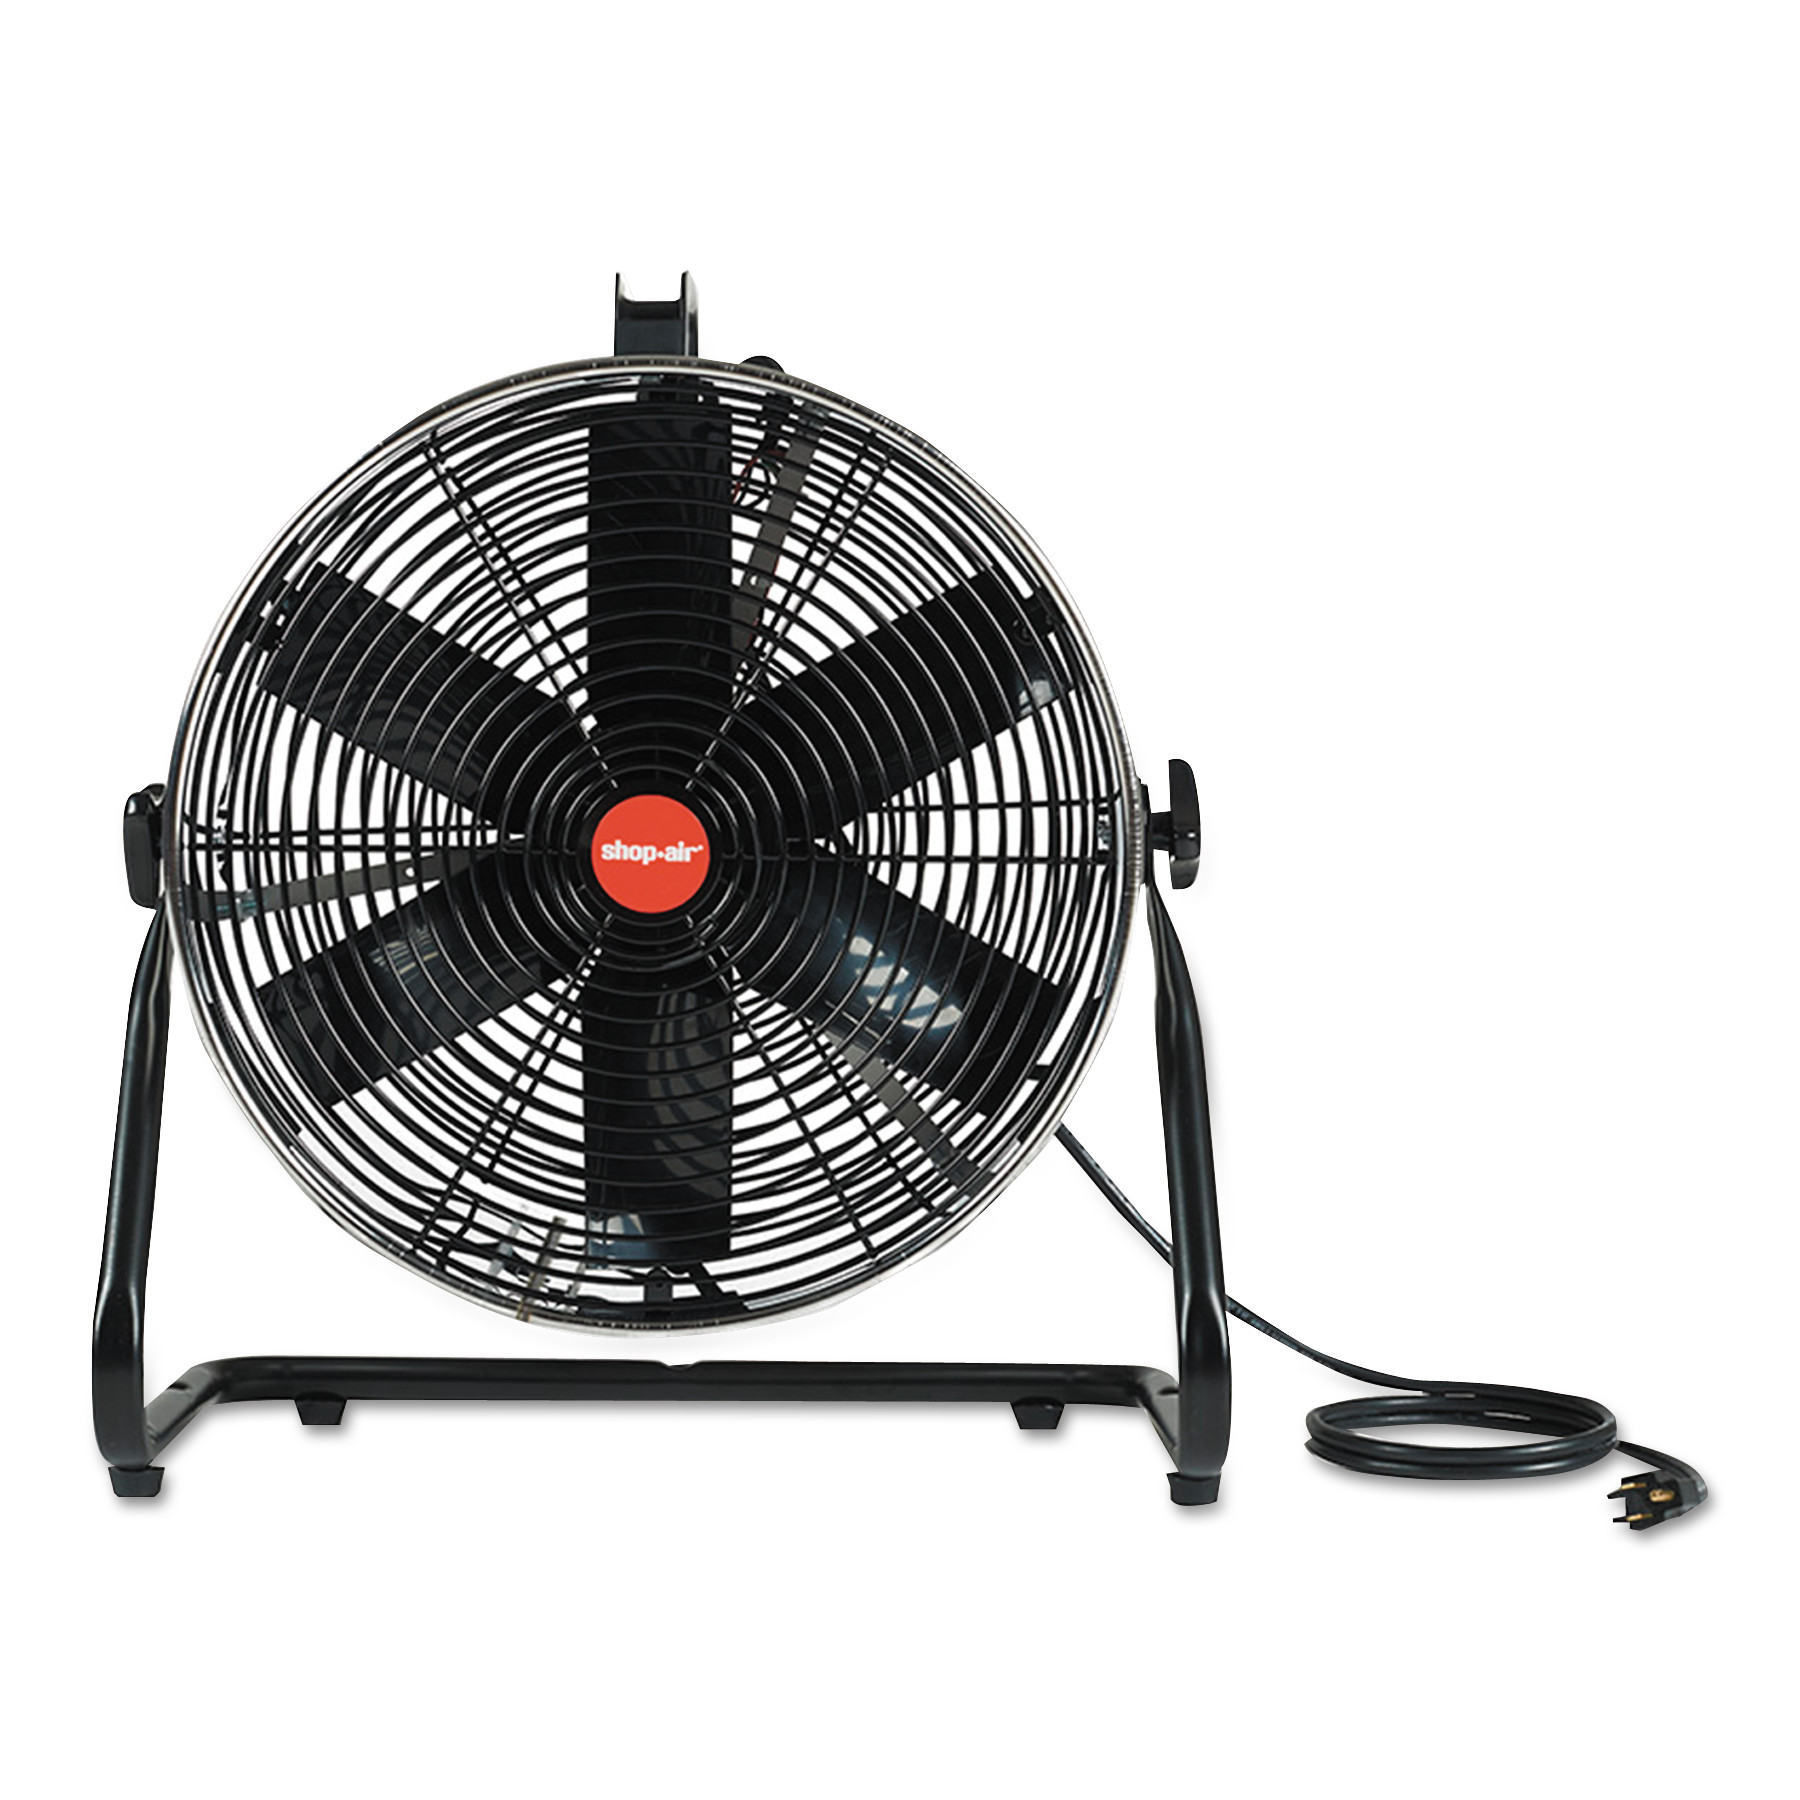  Shop-Air 1186200 Stainless Steel Portable Blower, 2 Speed, 1.7 A, 2200 CFM (SHO1186200) 